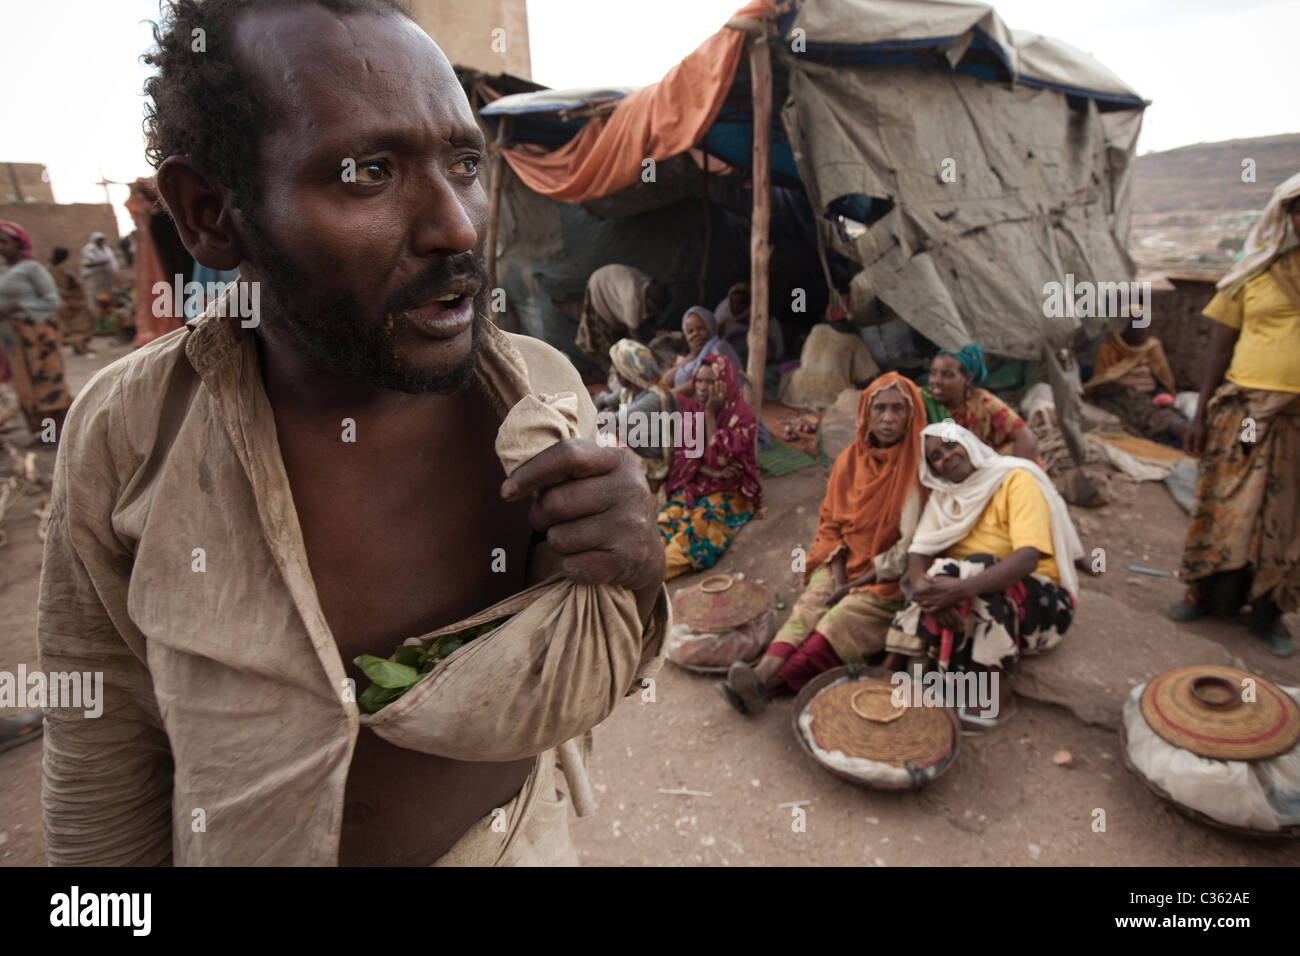 Street scene with khat addict - Old Town, Harar Ethiopia, Africa Stock Photo